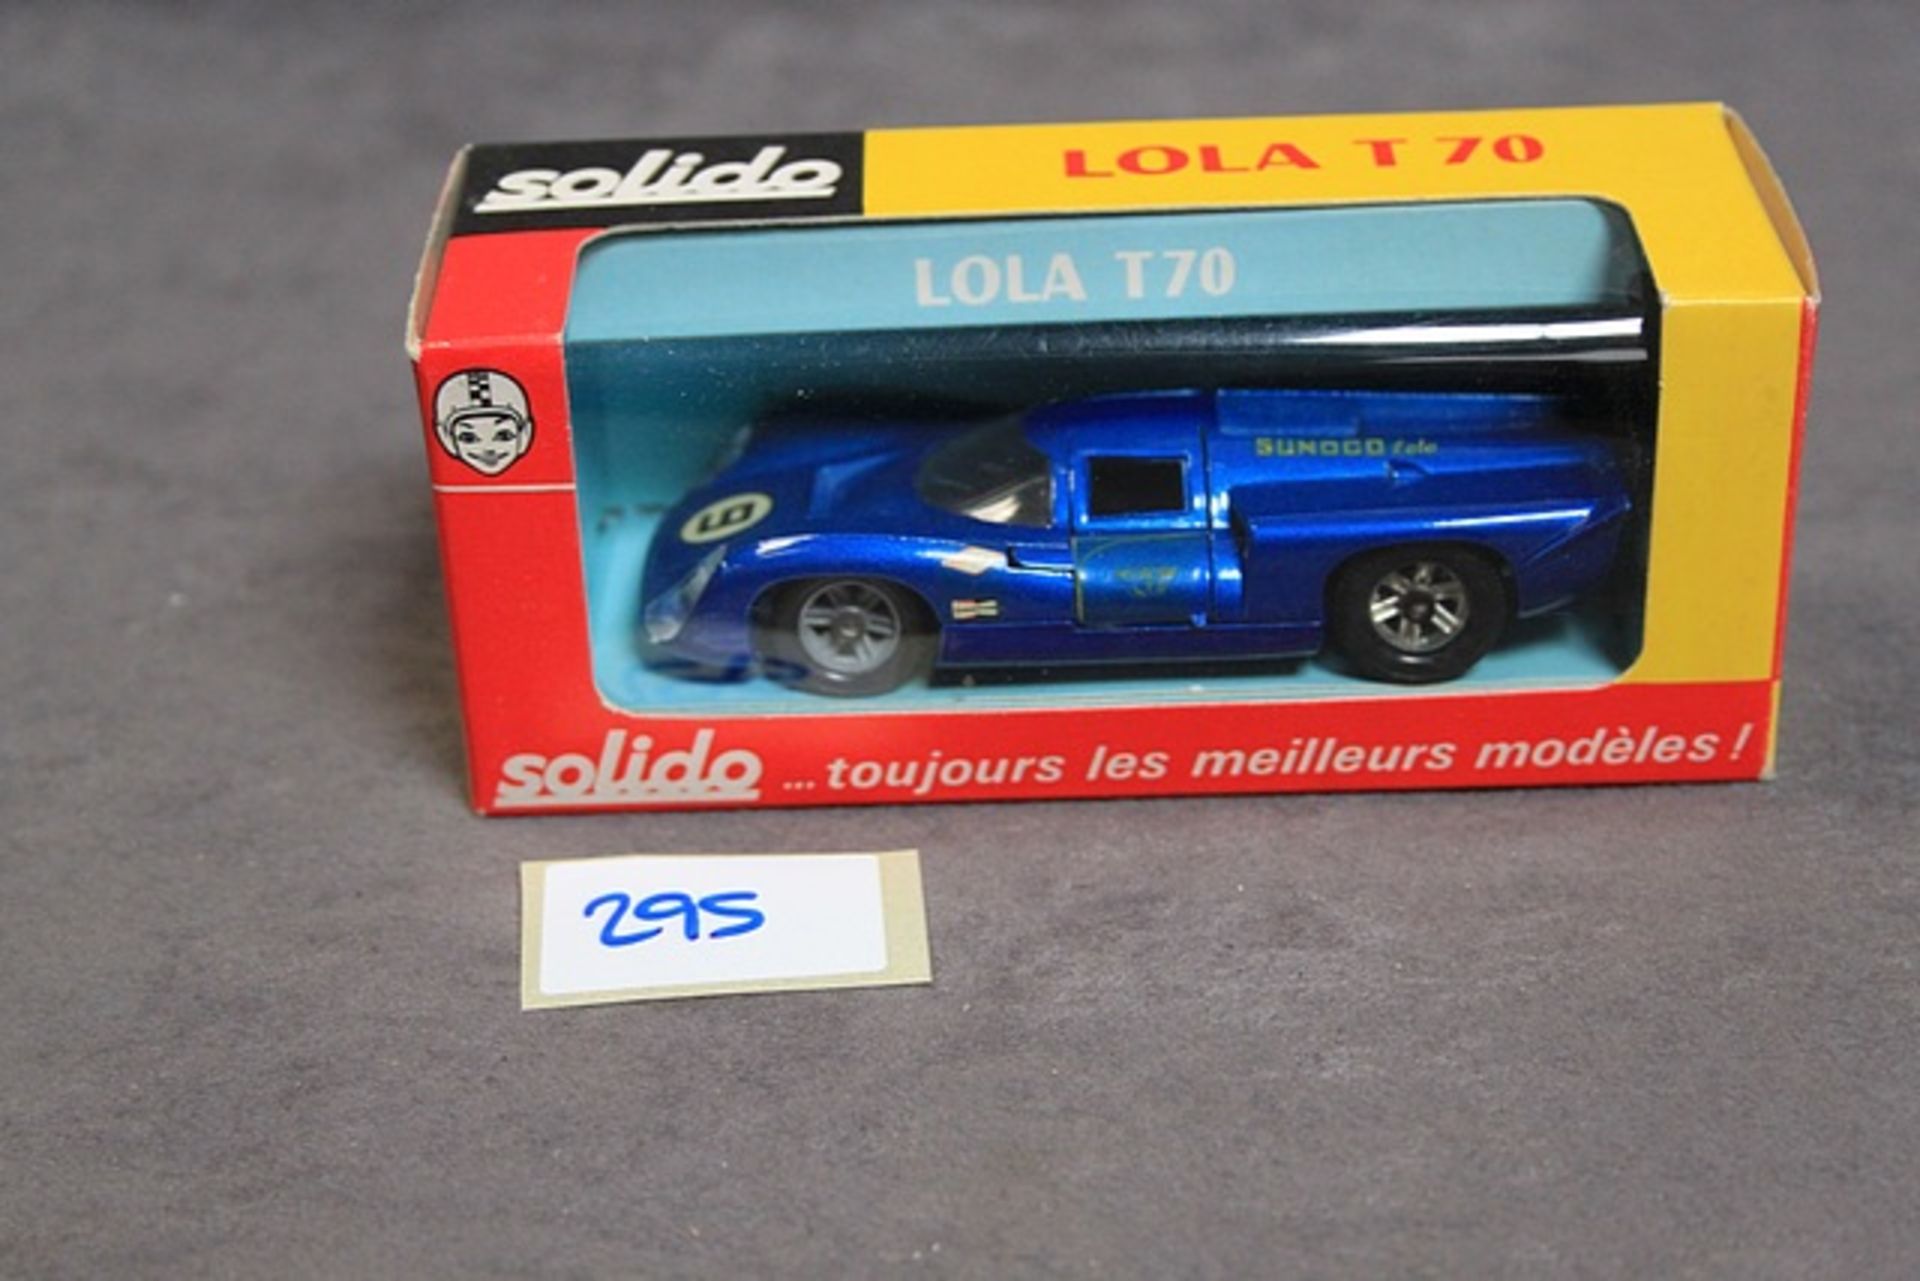 Solido Diecast Model #175 Lola T70 In Blue Complete With crisp Box - Image 2 of 2